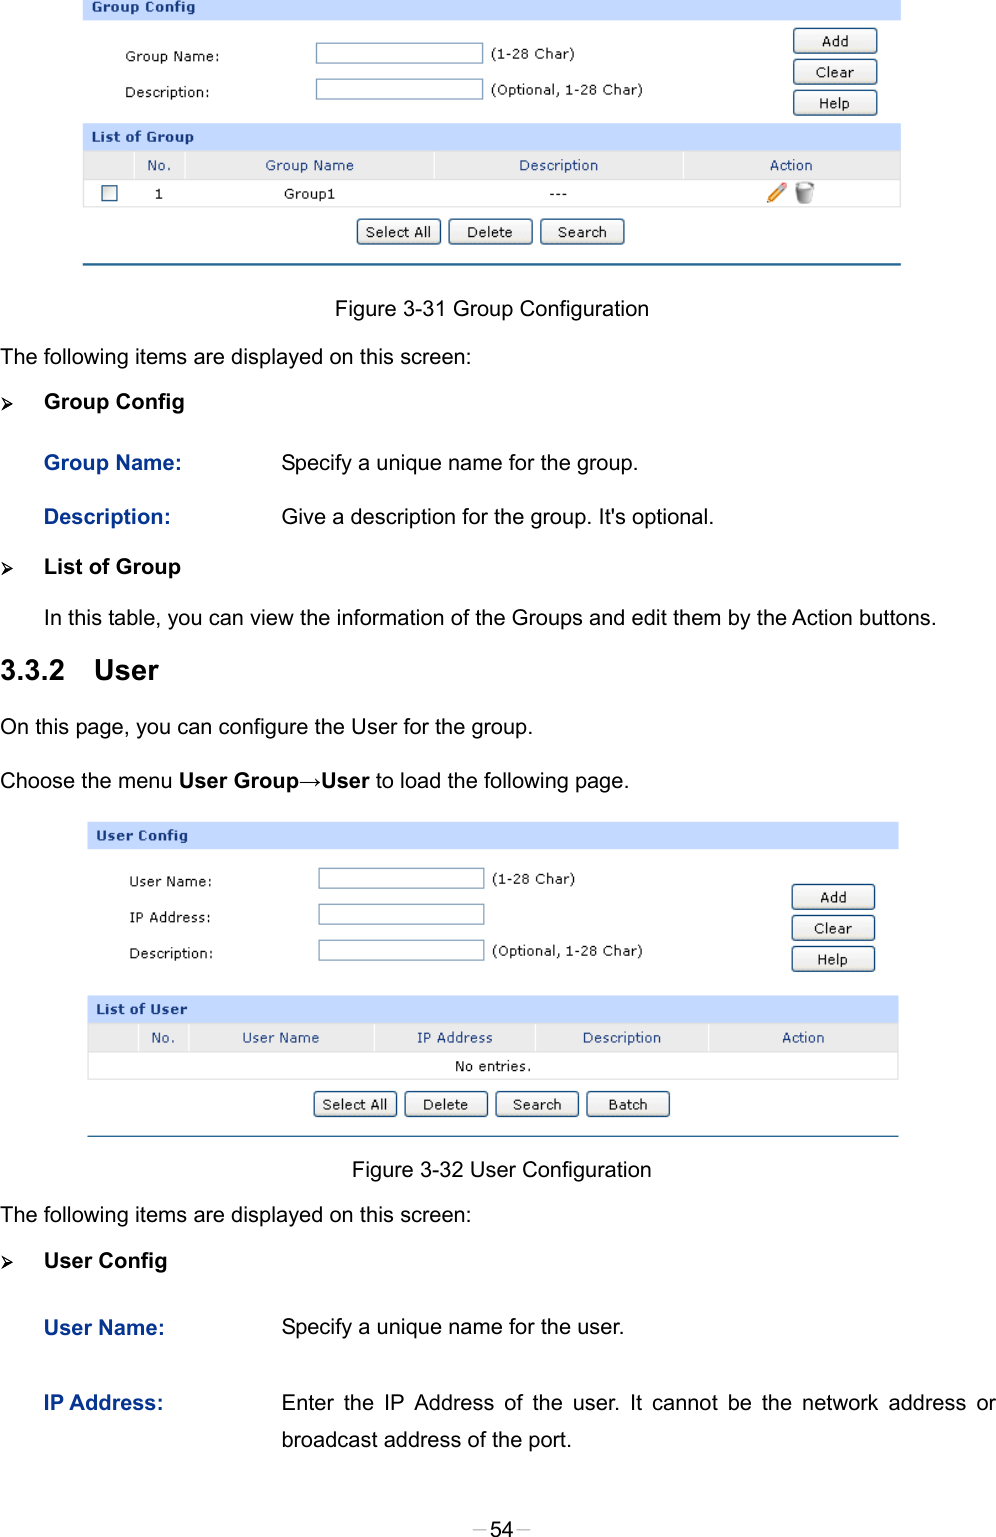   Figure 3-31 Group Configuration The following items are displayed on this screen:  Group Config Group Name: Specify a unique name for the group. Description: Give a description for the group. It&apos;s optional.  List of Group In this table, you can view the information of the Groups and edit them by the Action buttons. 3.3.2 User On this page, you can configure the User for the group. Choose the menu User Group→User to load the following page.  Figure 3-32 User Configuration The following items are displayed on this screen:  User Config User Name: Specify a unique name for the user. IP Address: Enter the IP Address of the user. It cannot be the network address or broadcast address of the port. -54- 